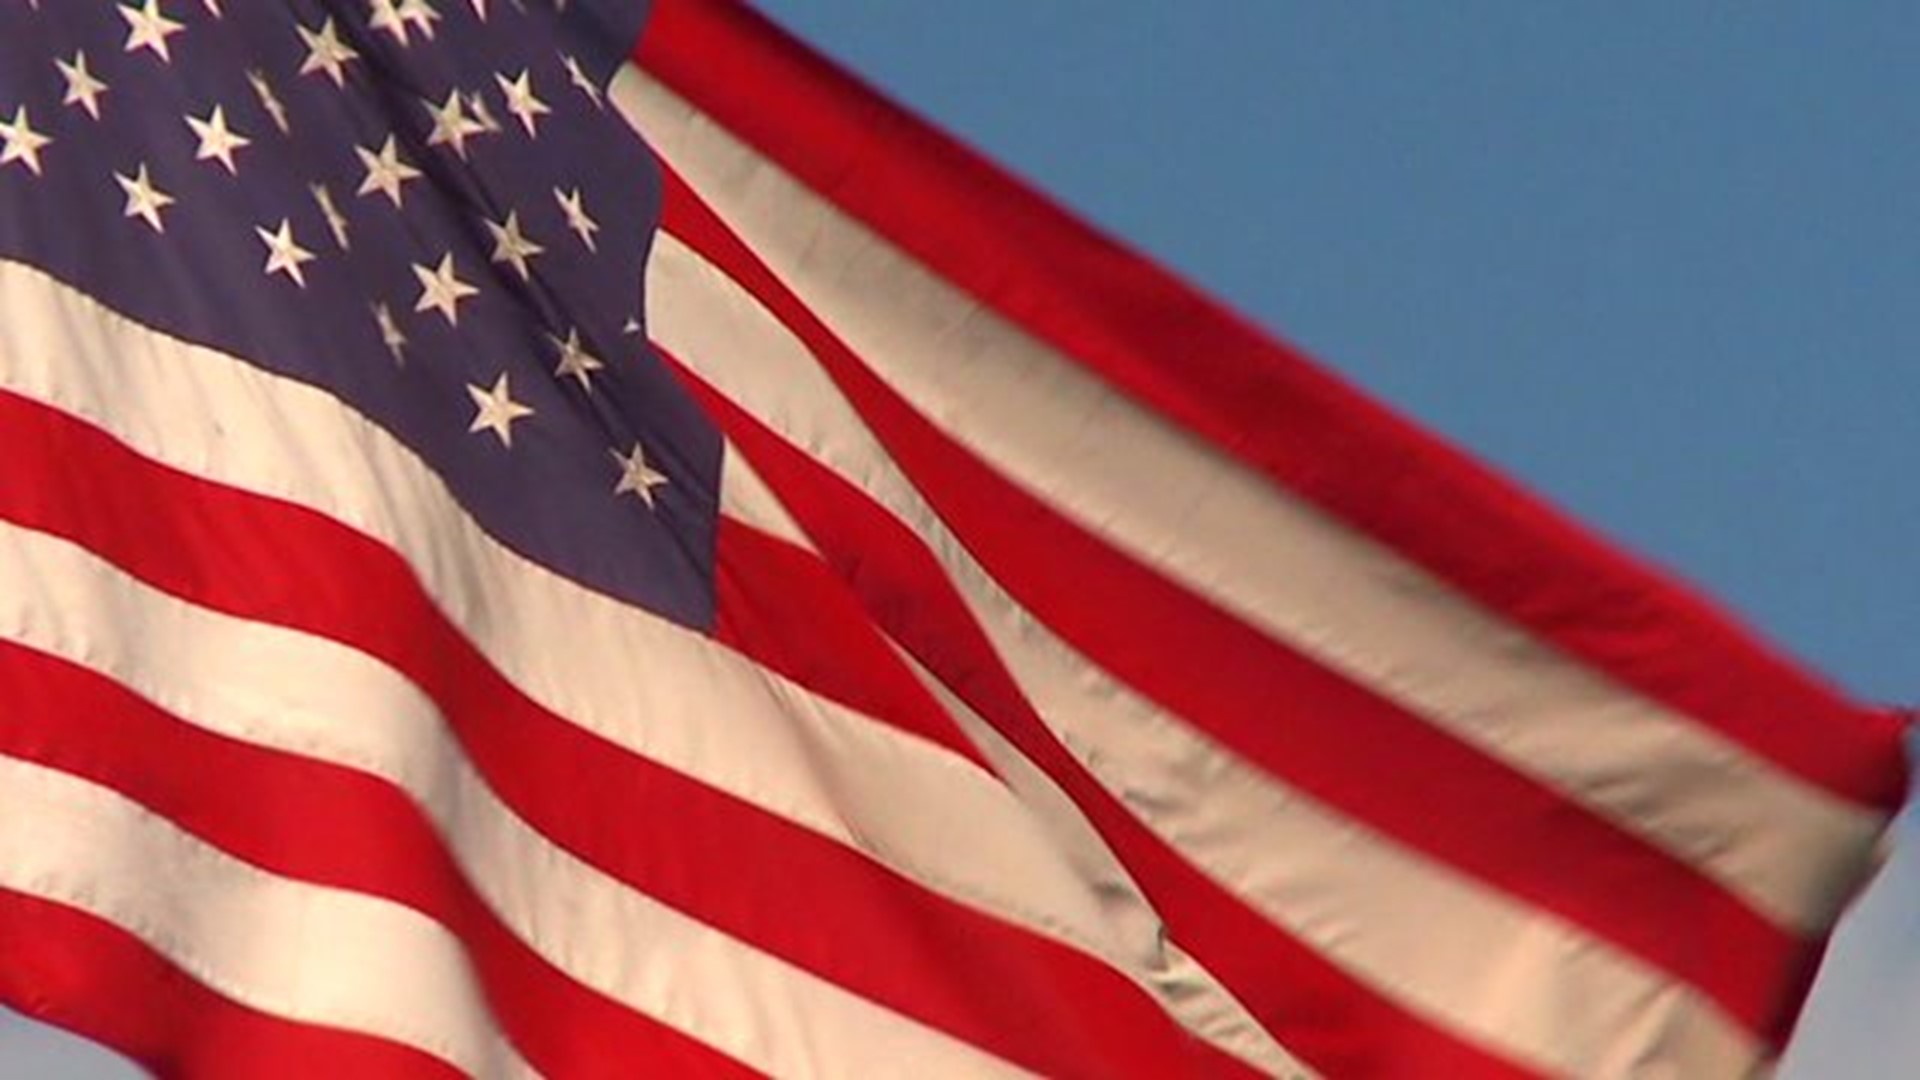 Mike Stevens shares his musings on the Stars and Stripes for Flag Day.